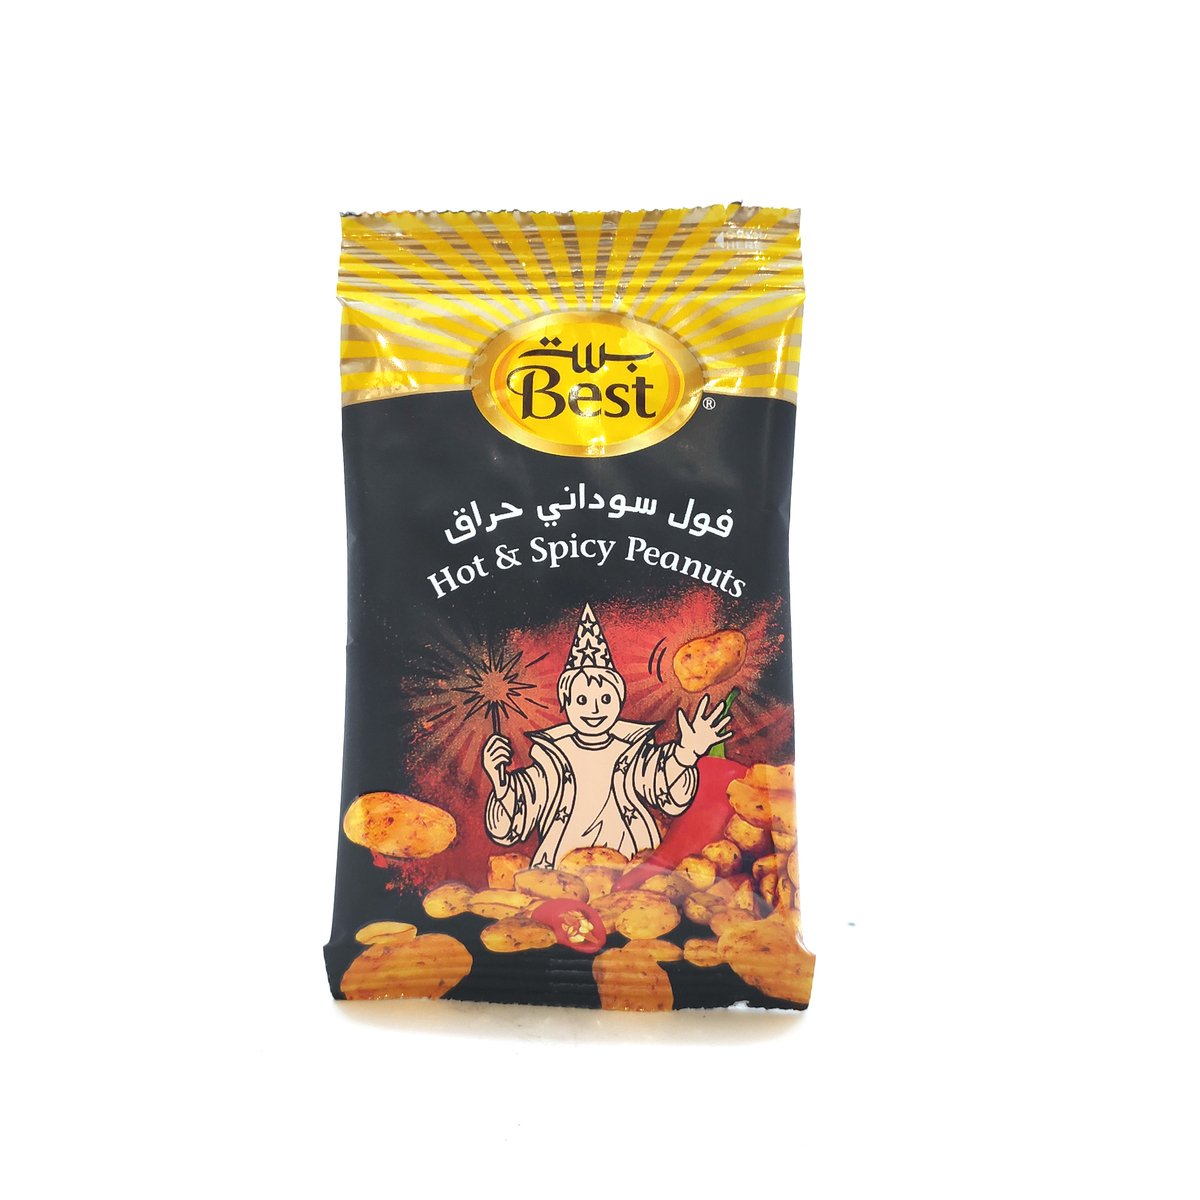 Best Hot & Spicy Peanuts 13 g